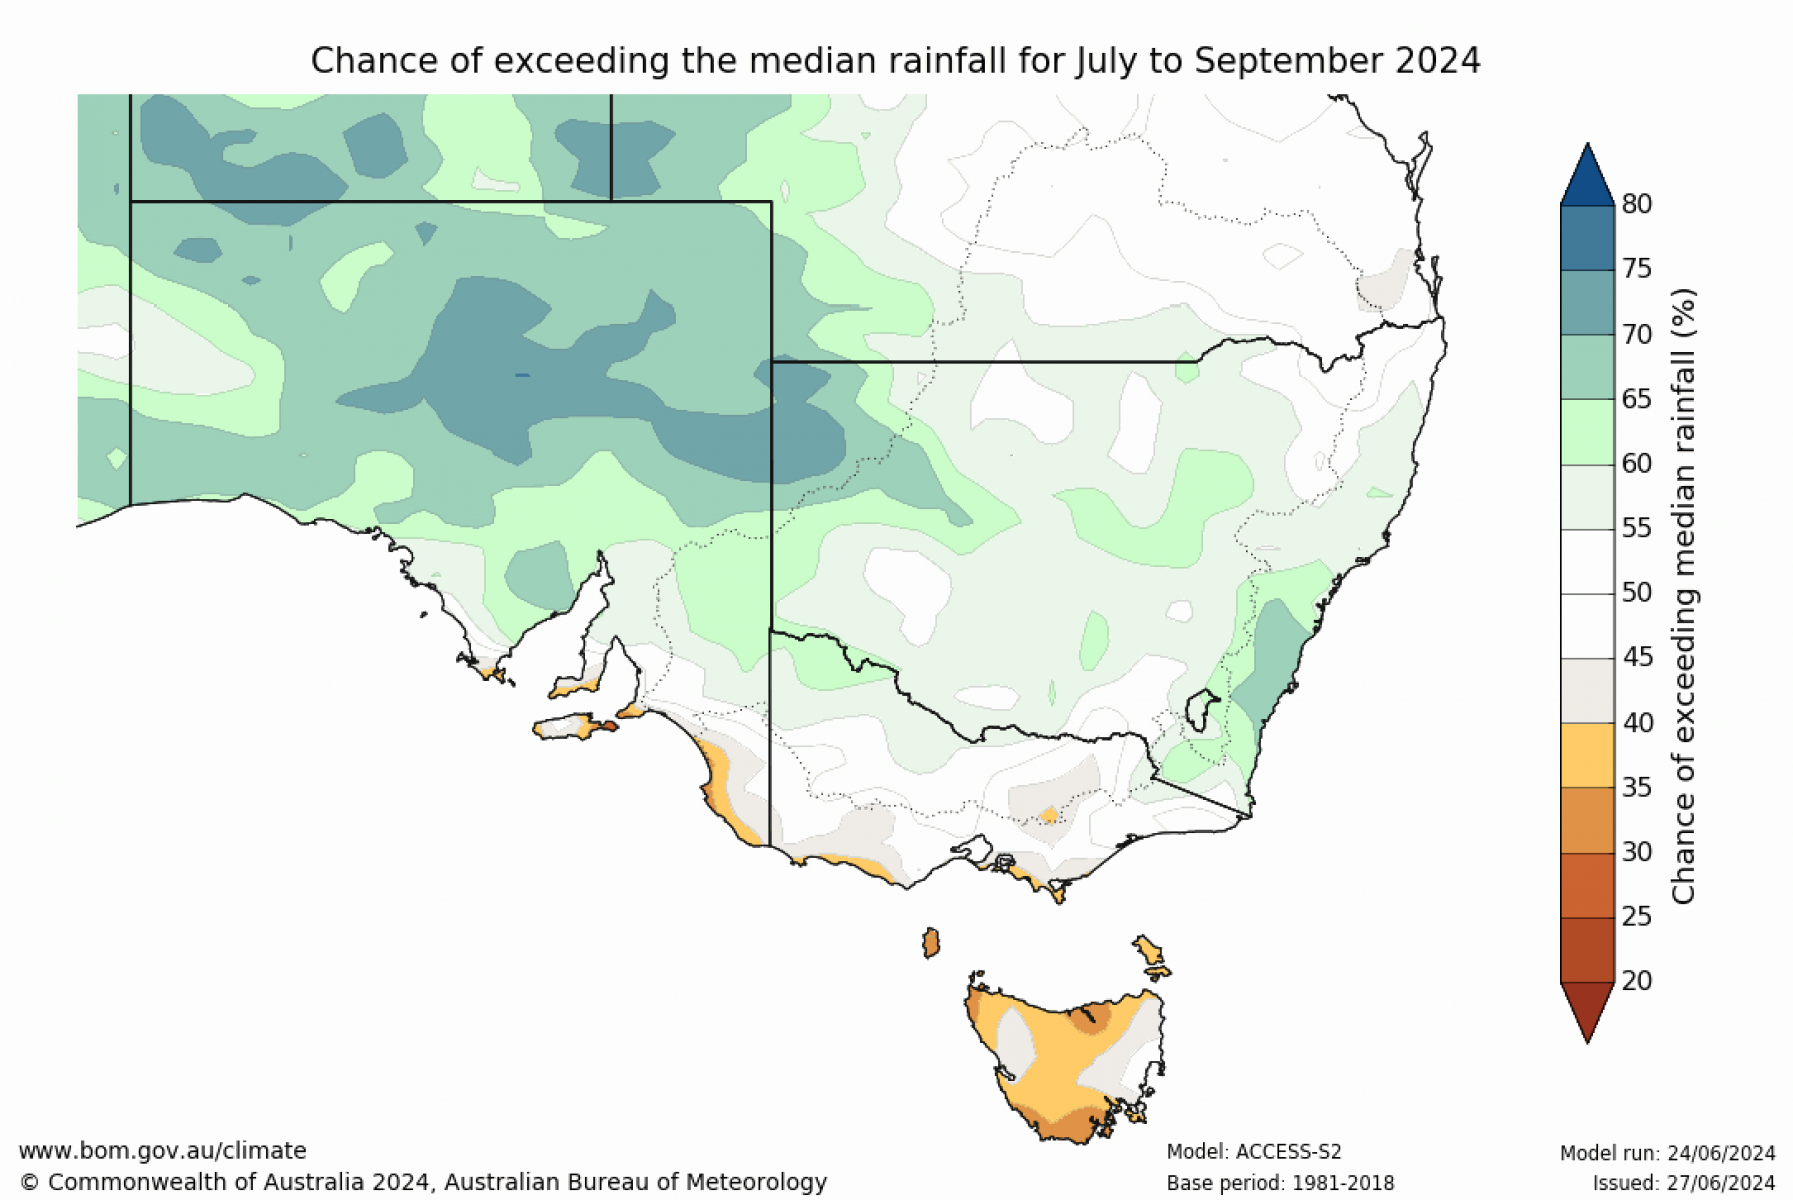 Chance of exceeding median rainfall for July to September 2024